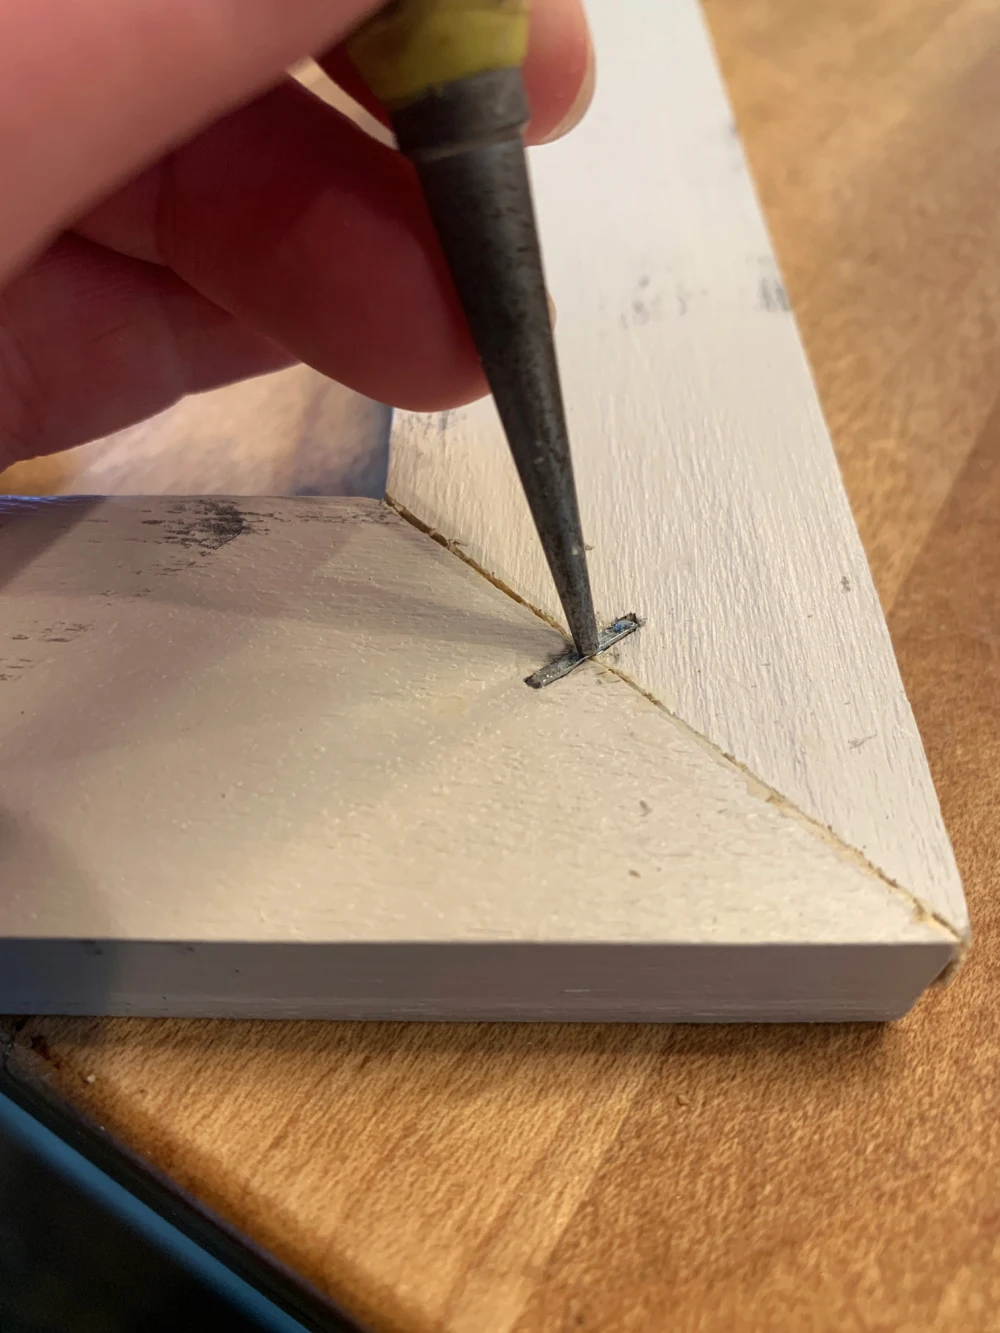 nail punch staple in wood